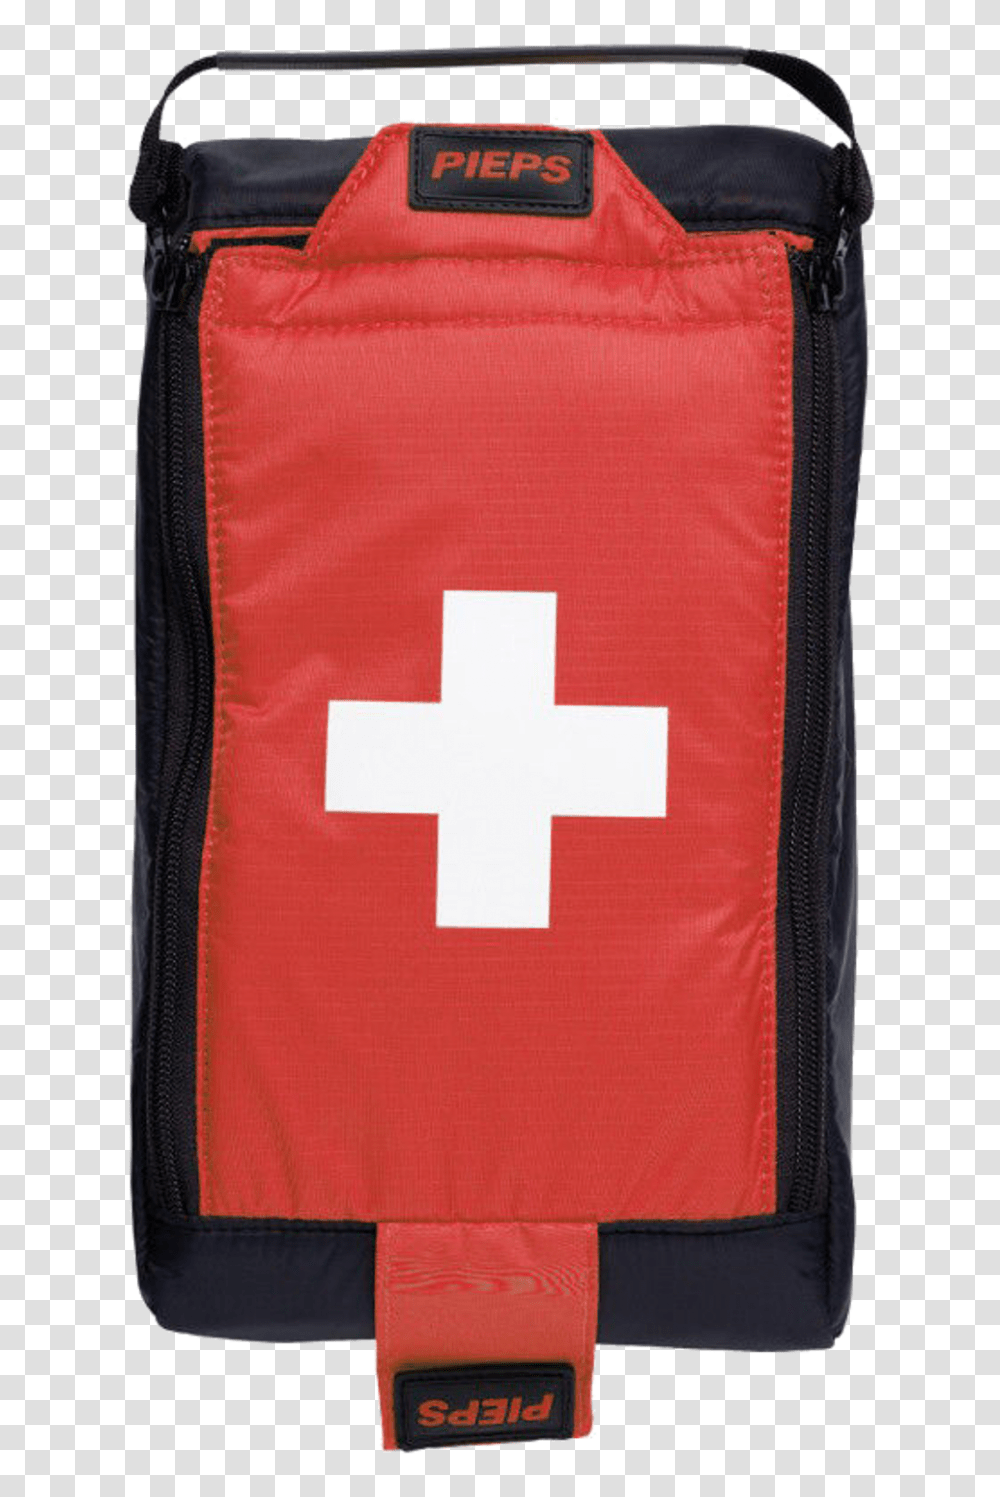 First Aid Kit, Purse, Handbag, Accessories, Accessory Transparent Png